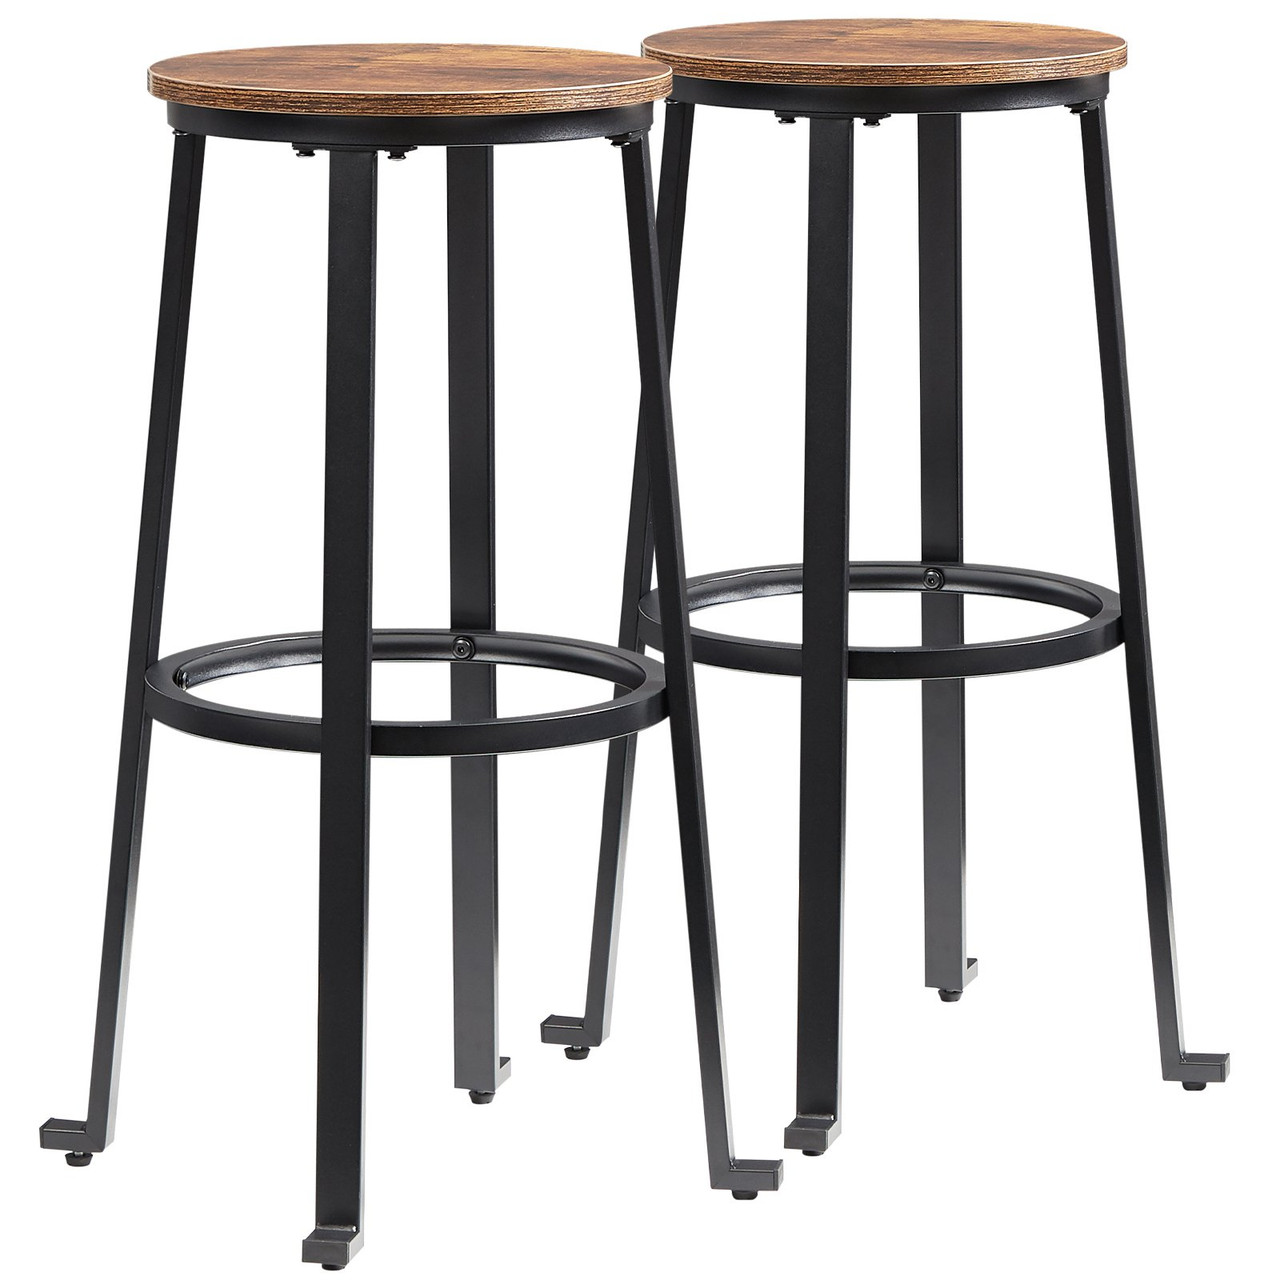 Rustic Bar Stools Counter Height Round Bar Chairs with Footrest 29" 2 Set